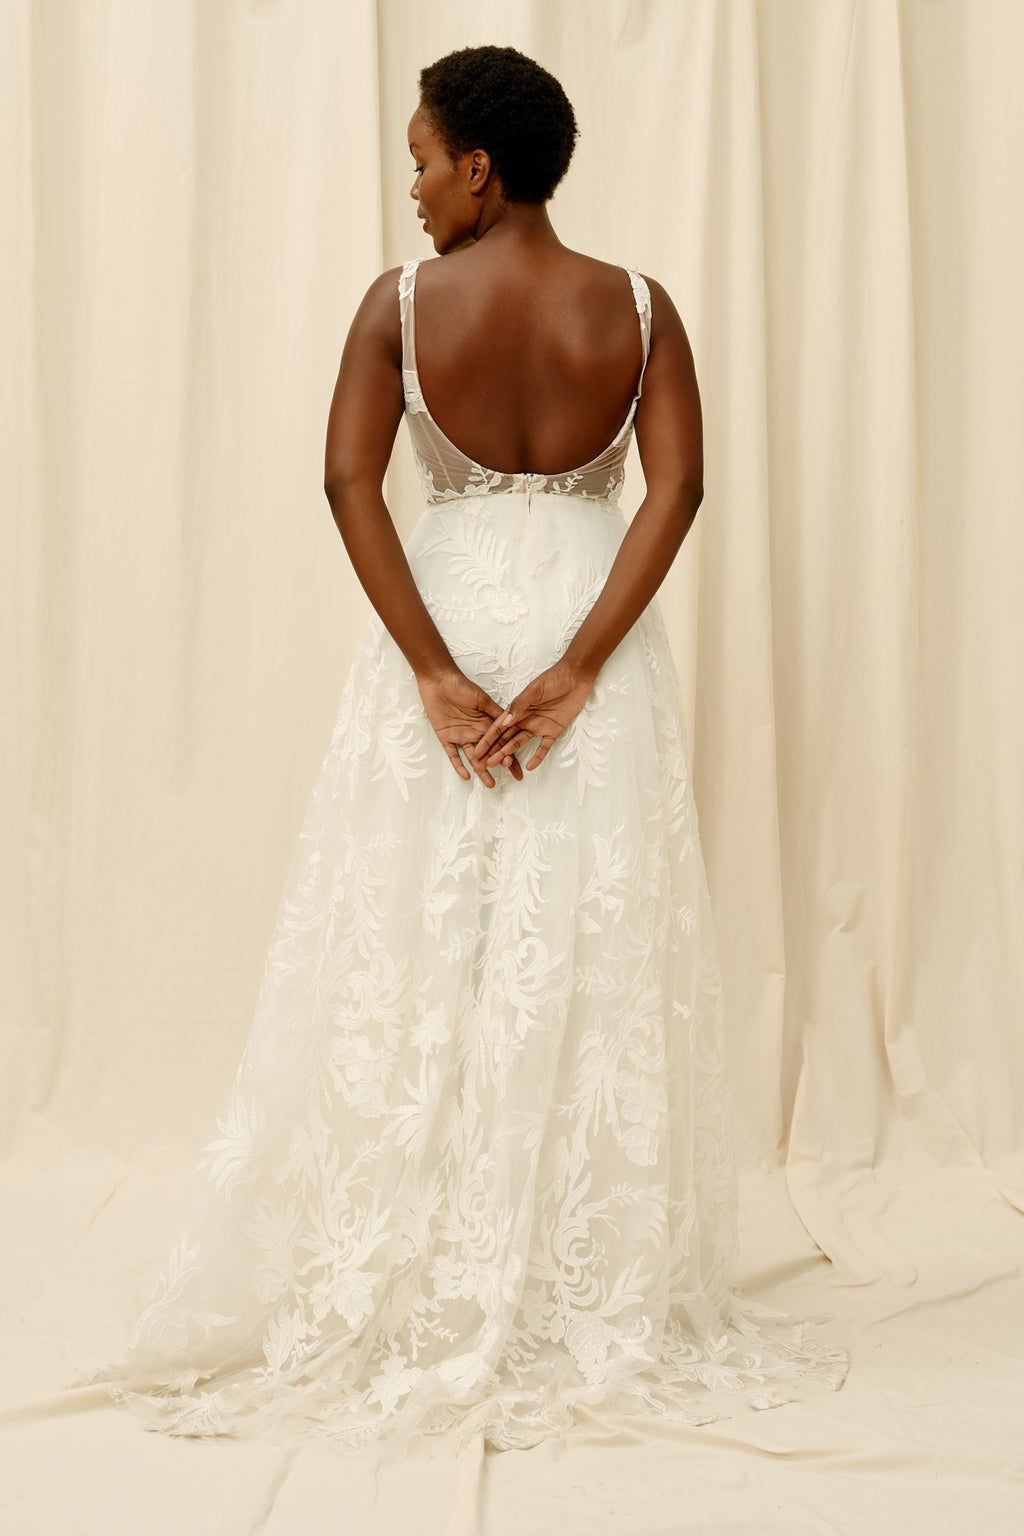 Unlined scoop back wedding dress with unique and modern floral lace